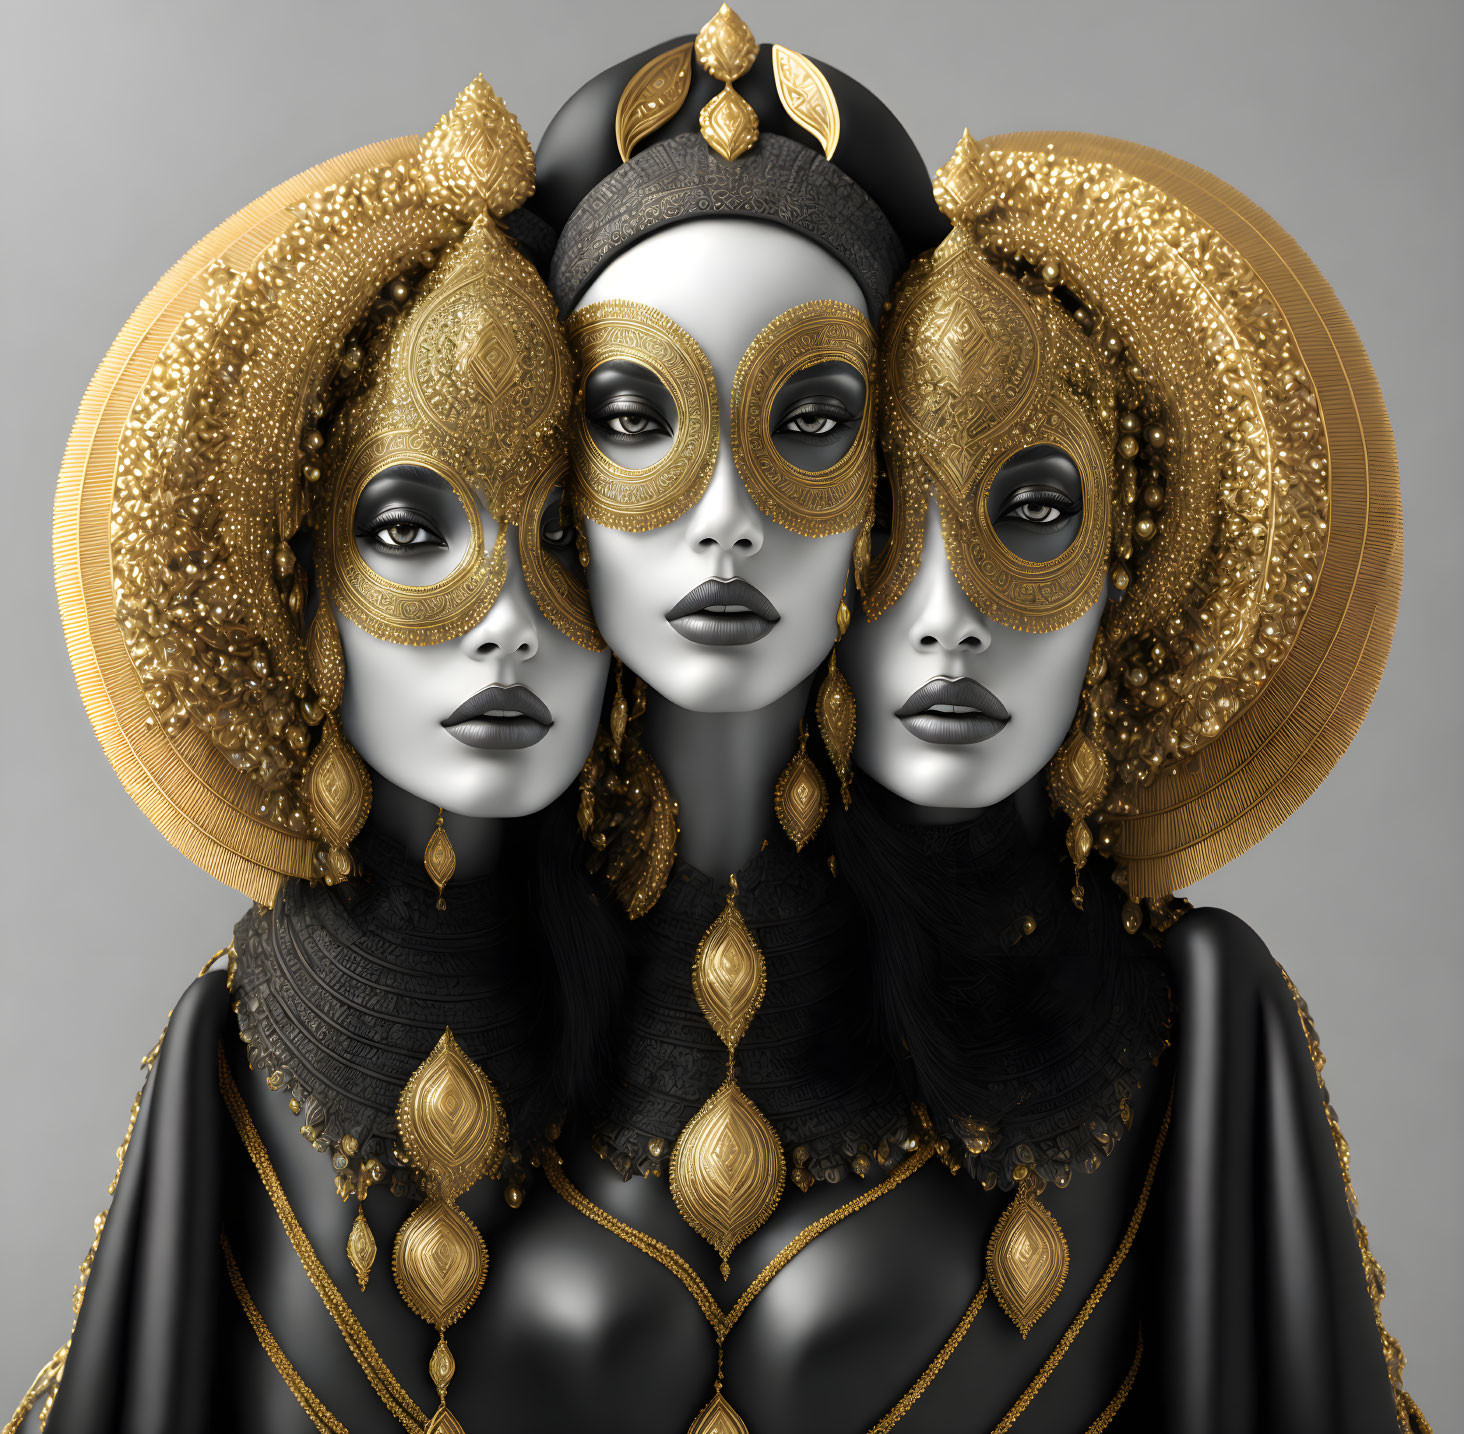 Three identical figures in ornate golden masks and headpieces, cloaked in black with gold accents